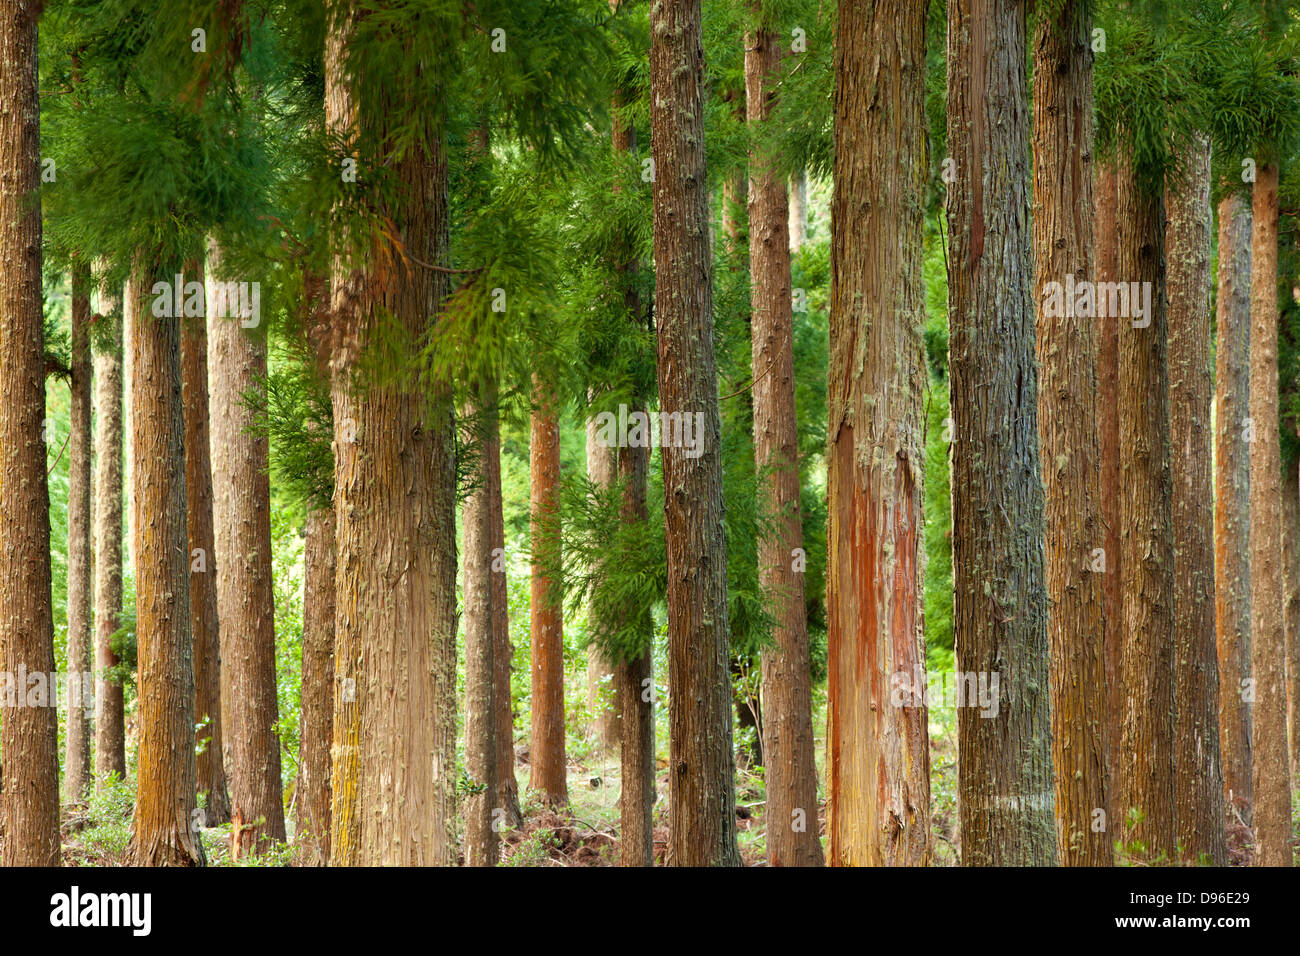 Forest at Bras Sec in the Cirque de Cilaos caldera on the French island of Reunion in the Indian Ocean. Stock Photo